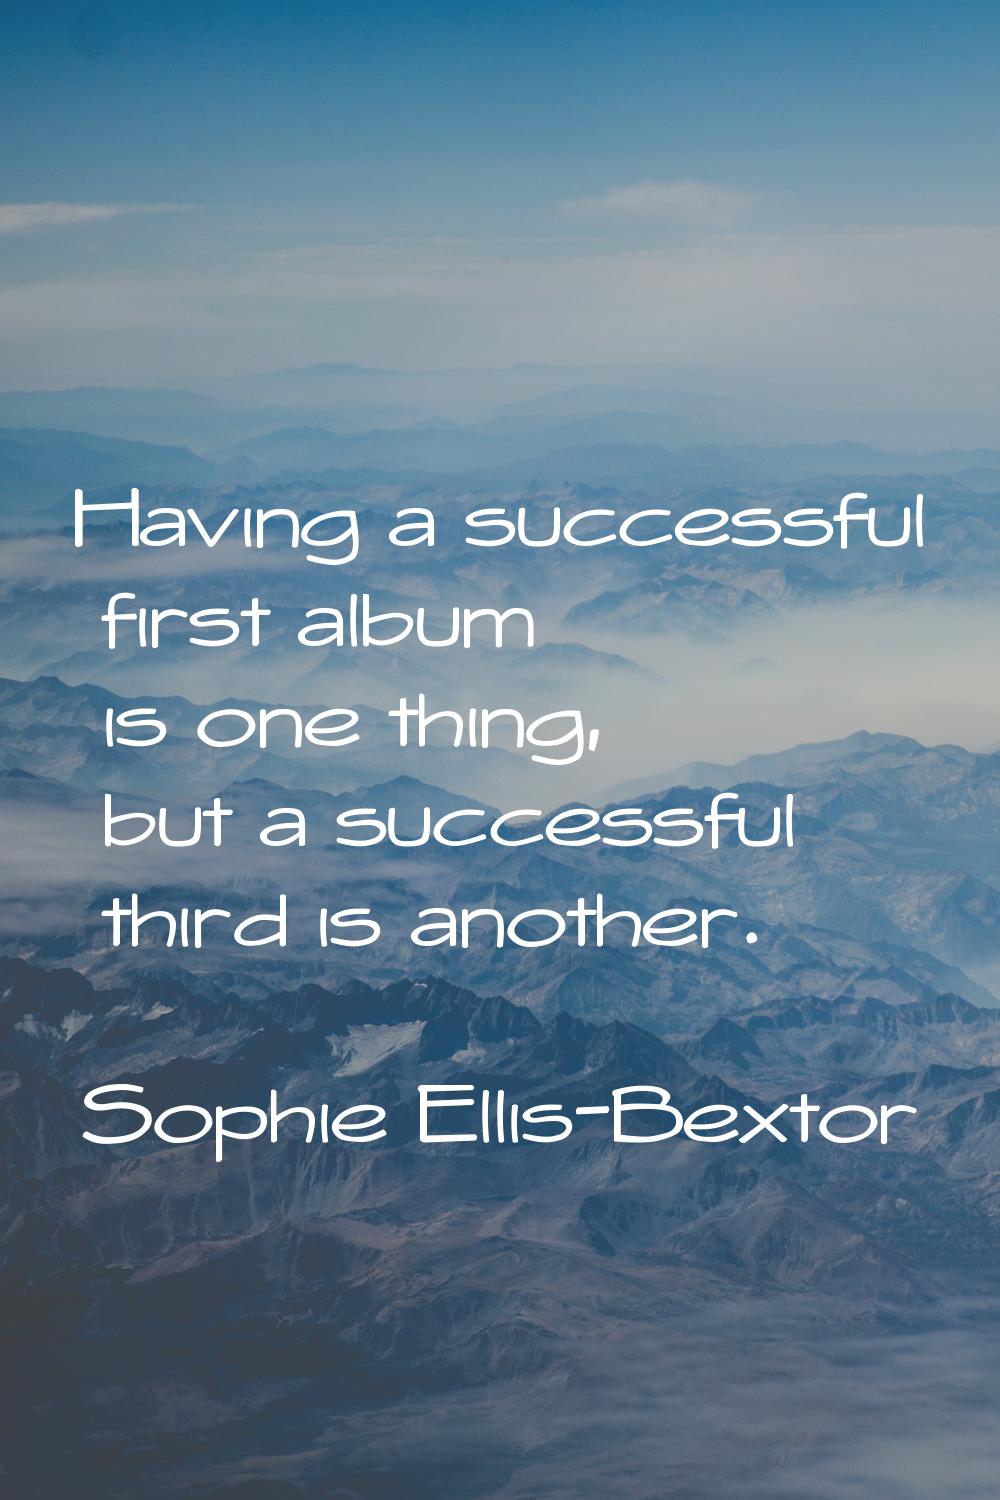 Having a successful first album is one thing, but a successful third is another.